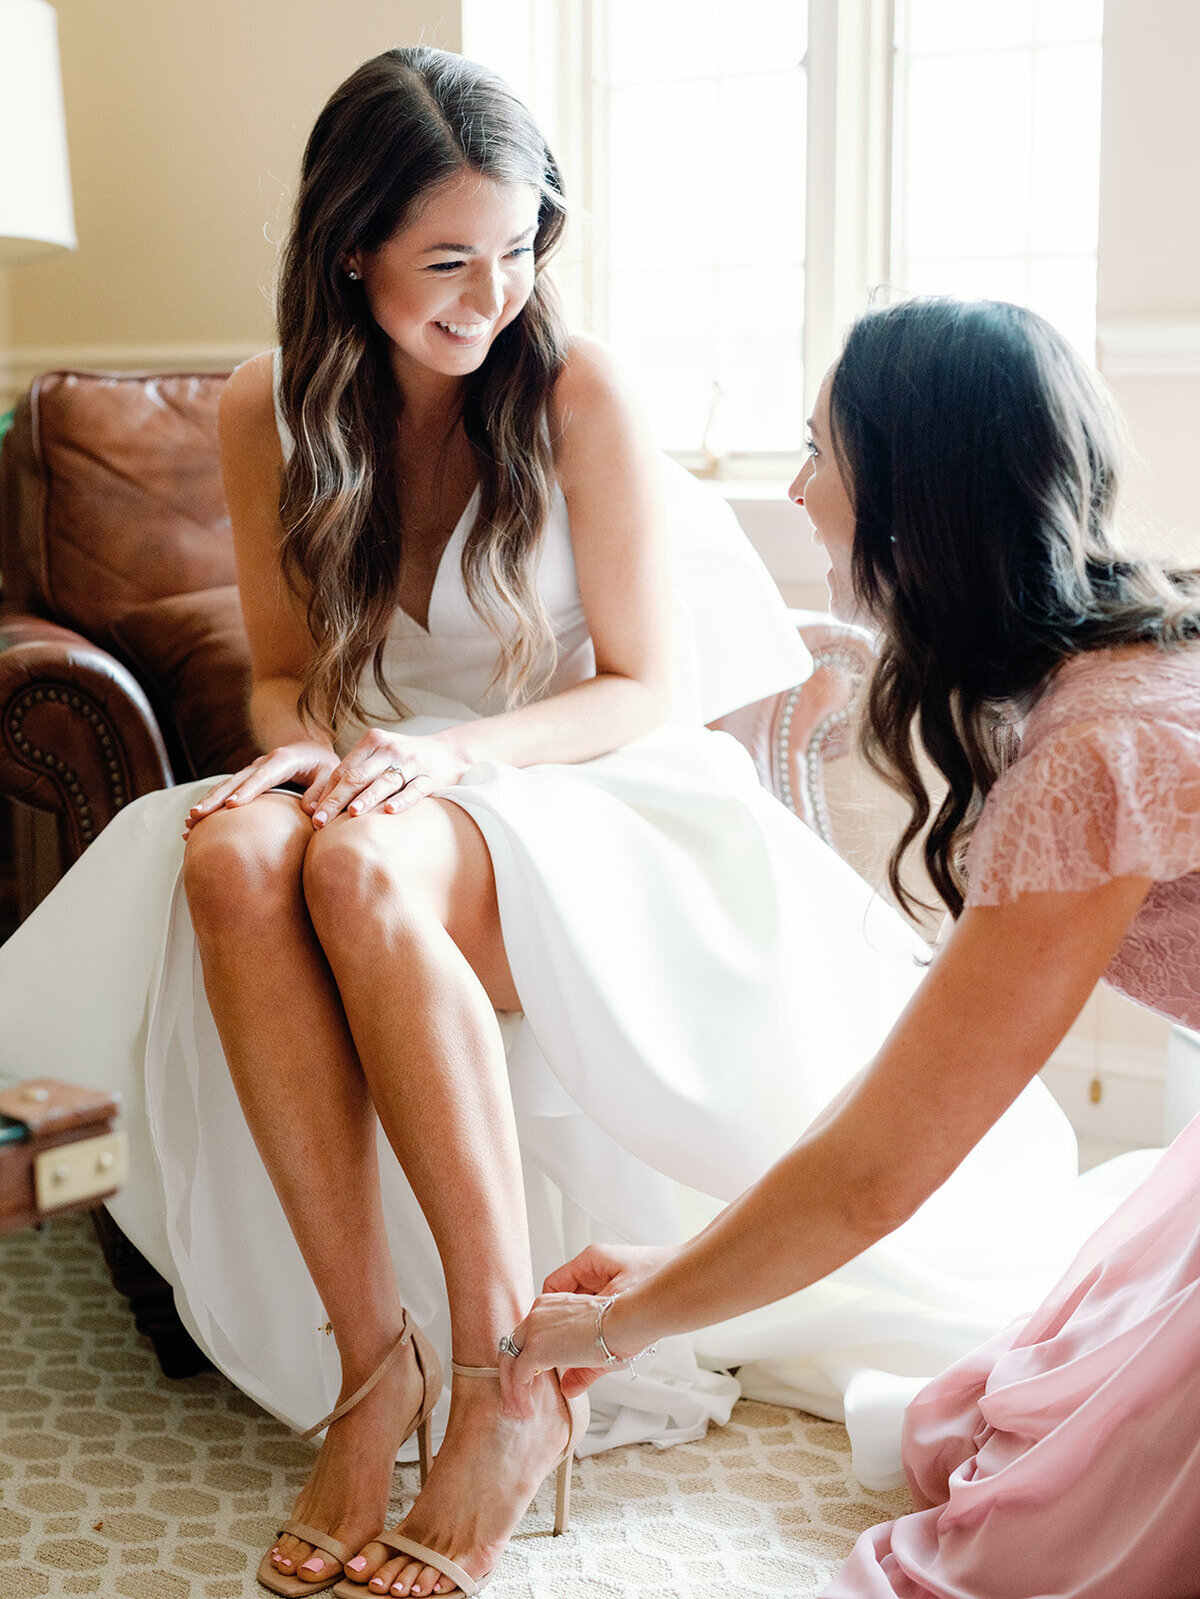 Bride and sister share a moment looking at eachother while she helps bride with her shoes.